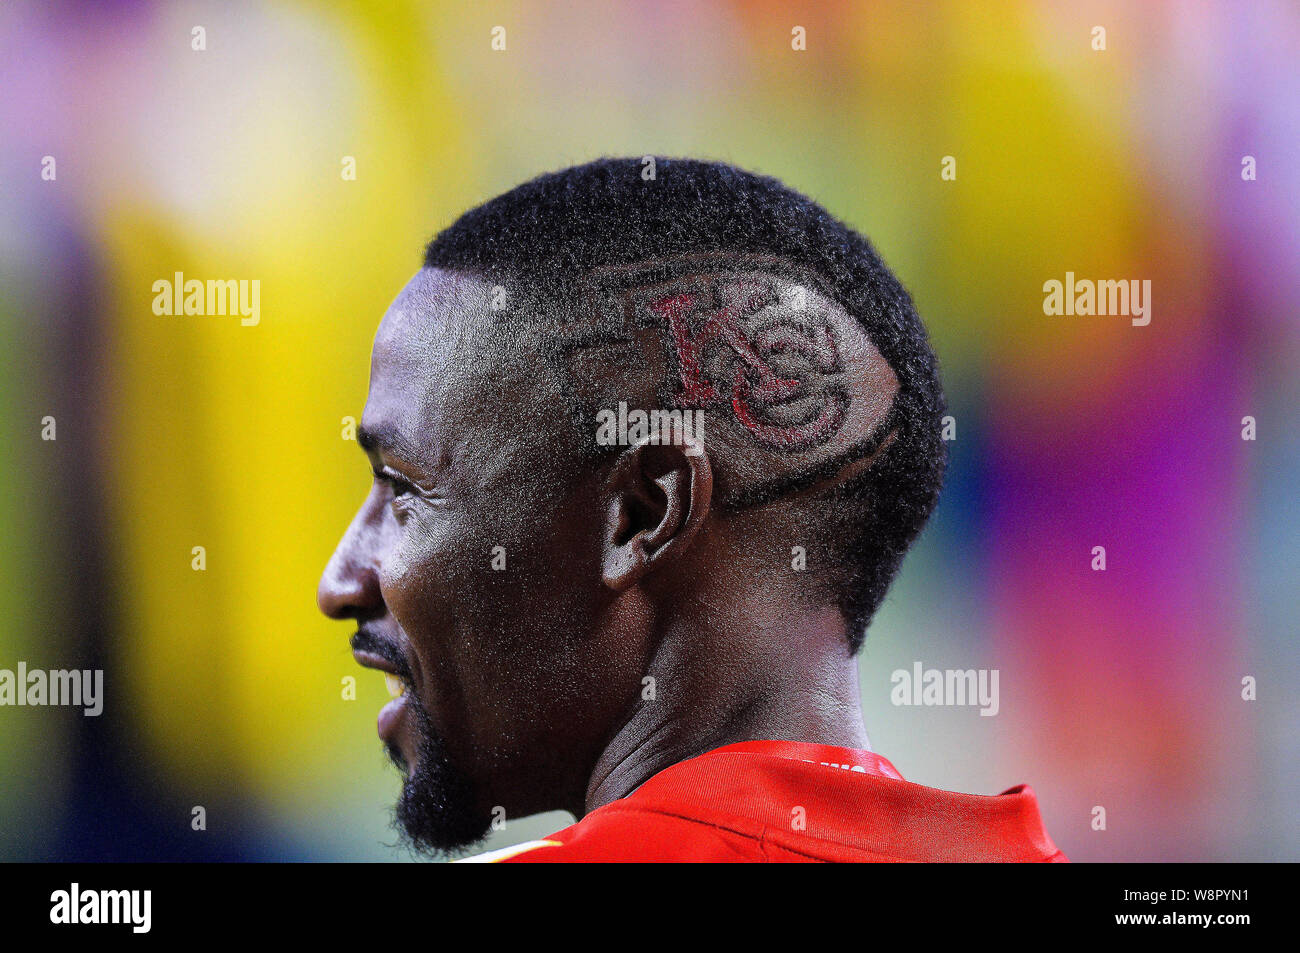 Kansas City, Missouri, USA. 10th August, 2019. A member of the Kansas City sideline cheer squad sports a haircut with a Chiefs logo during the NFL Football Game between the Cincinnati Bengals and the Kansas City Chiefs at Arrowhead Stadium in Kansas City, Missouri. Kendall Shaw/CSM Credit: Cal Sport Media/Alamy Live News Stock Photo